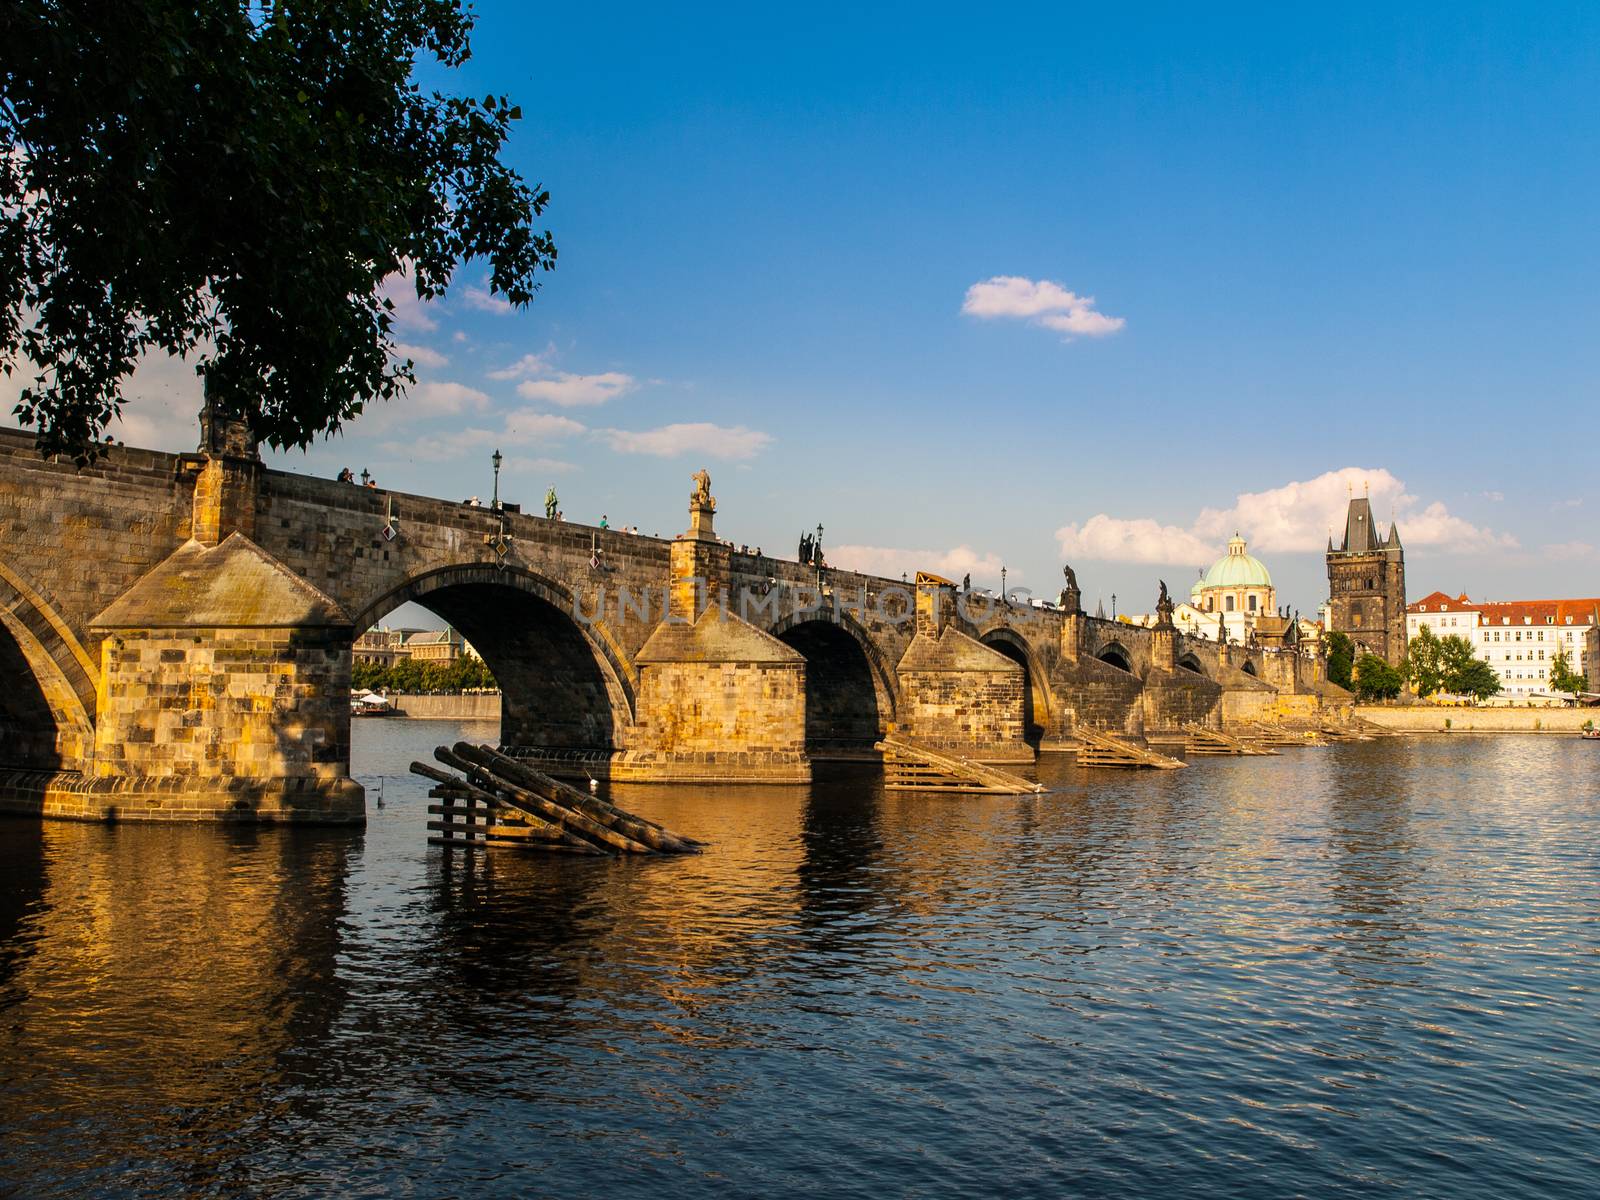 Charles Bridge and Old Town Bridge Tower in Prague by pyty